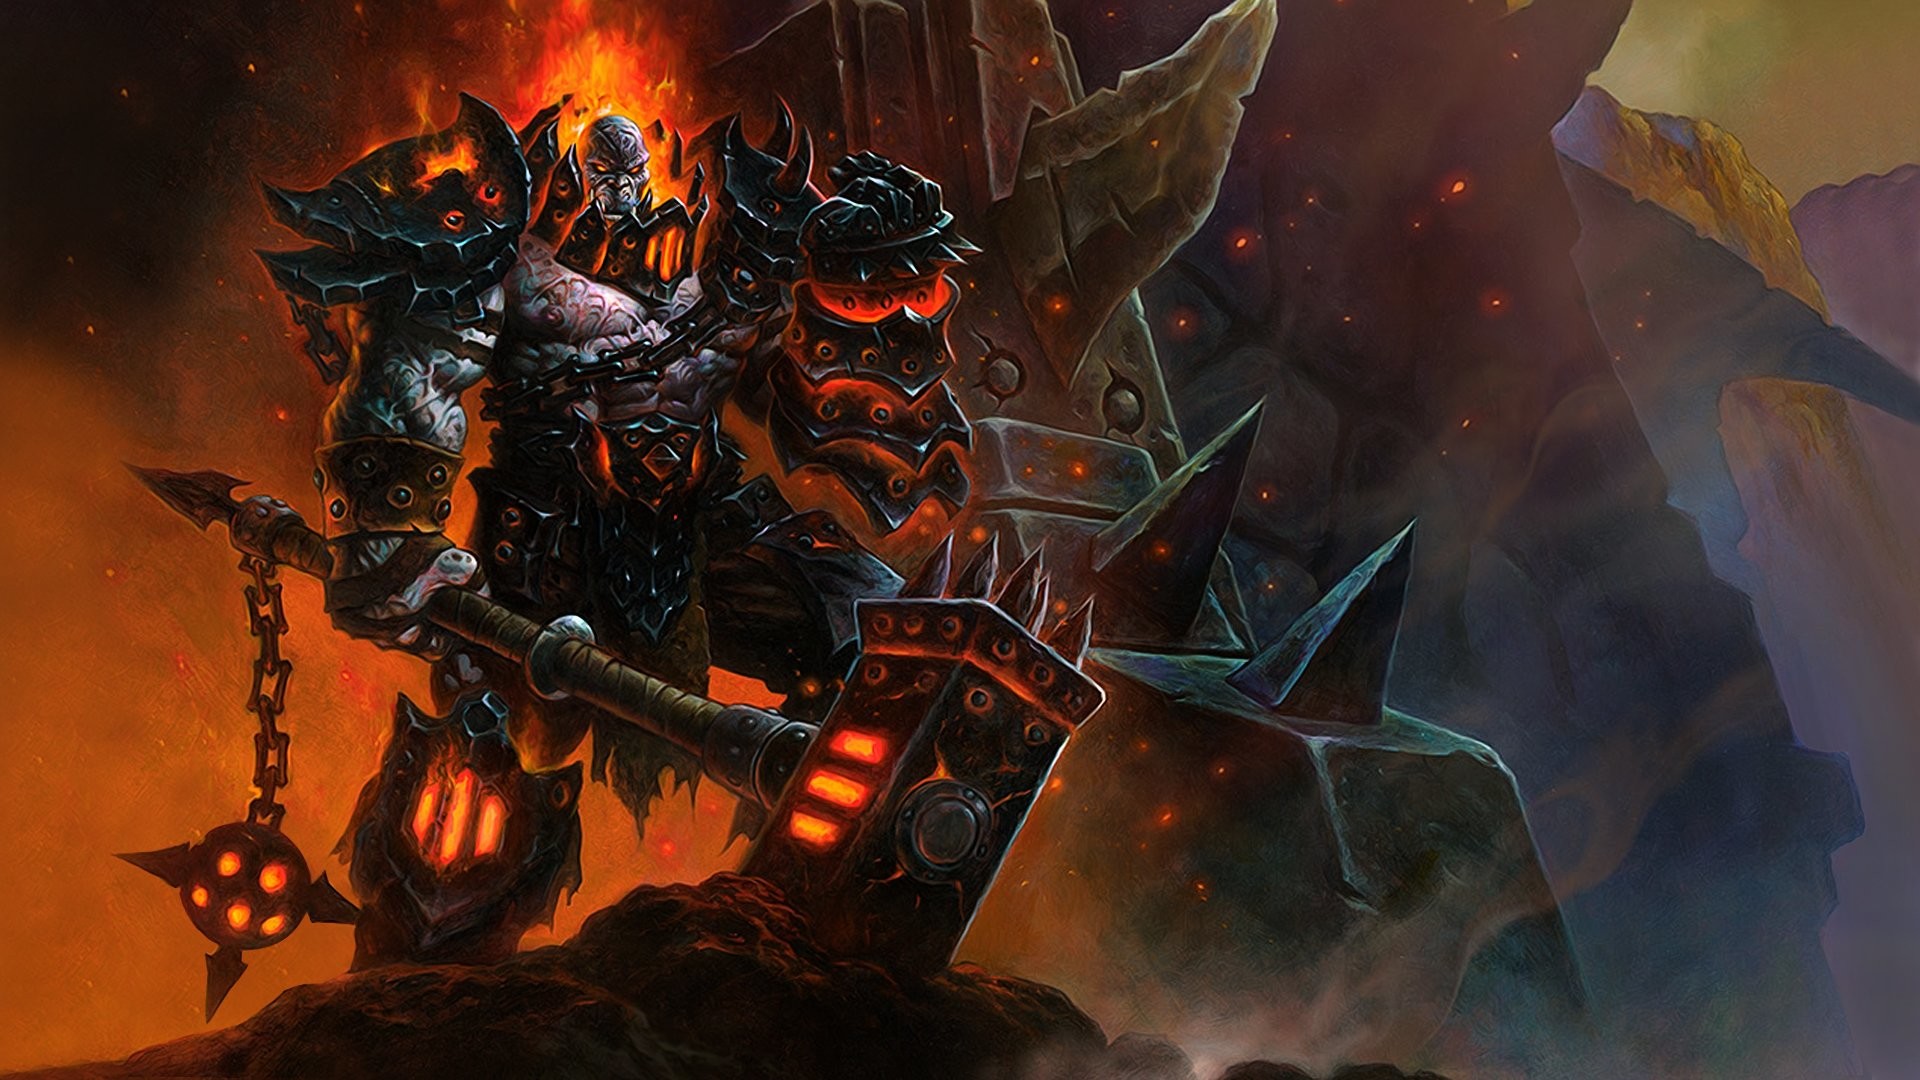 1920x1080 World of Warcraft Warlords of Draenor Images 07418